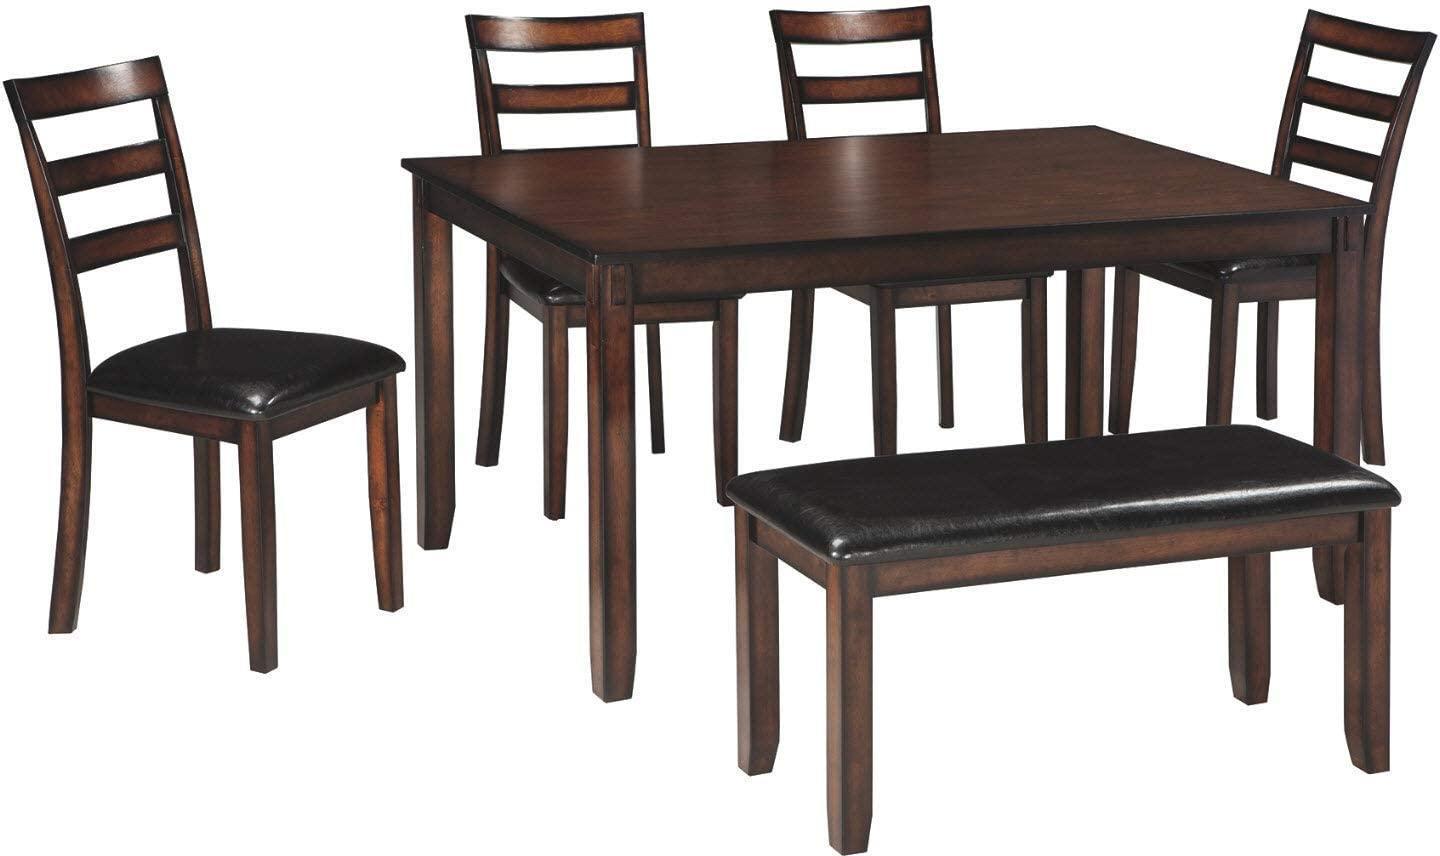 Signature Design by Ashley Coviar Dining Room Table and Chairs with Bench (Set of 6) - $518.85 MSRP